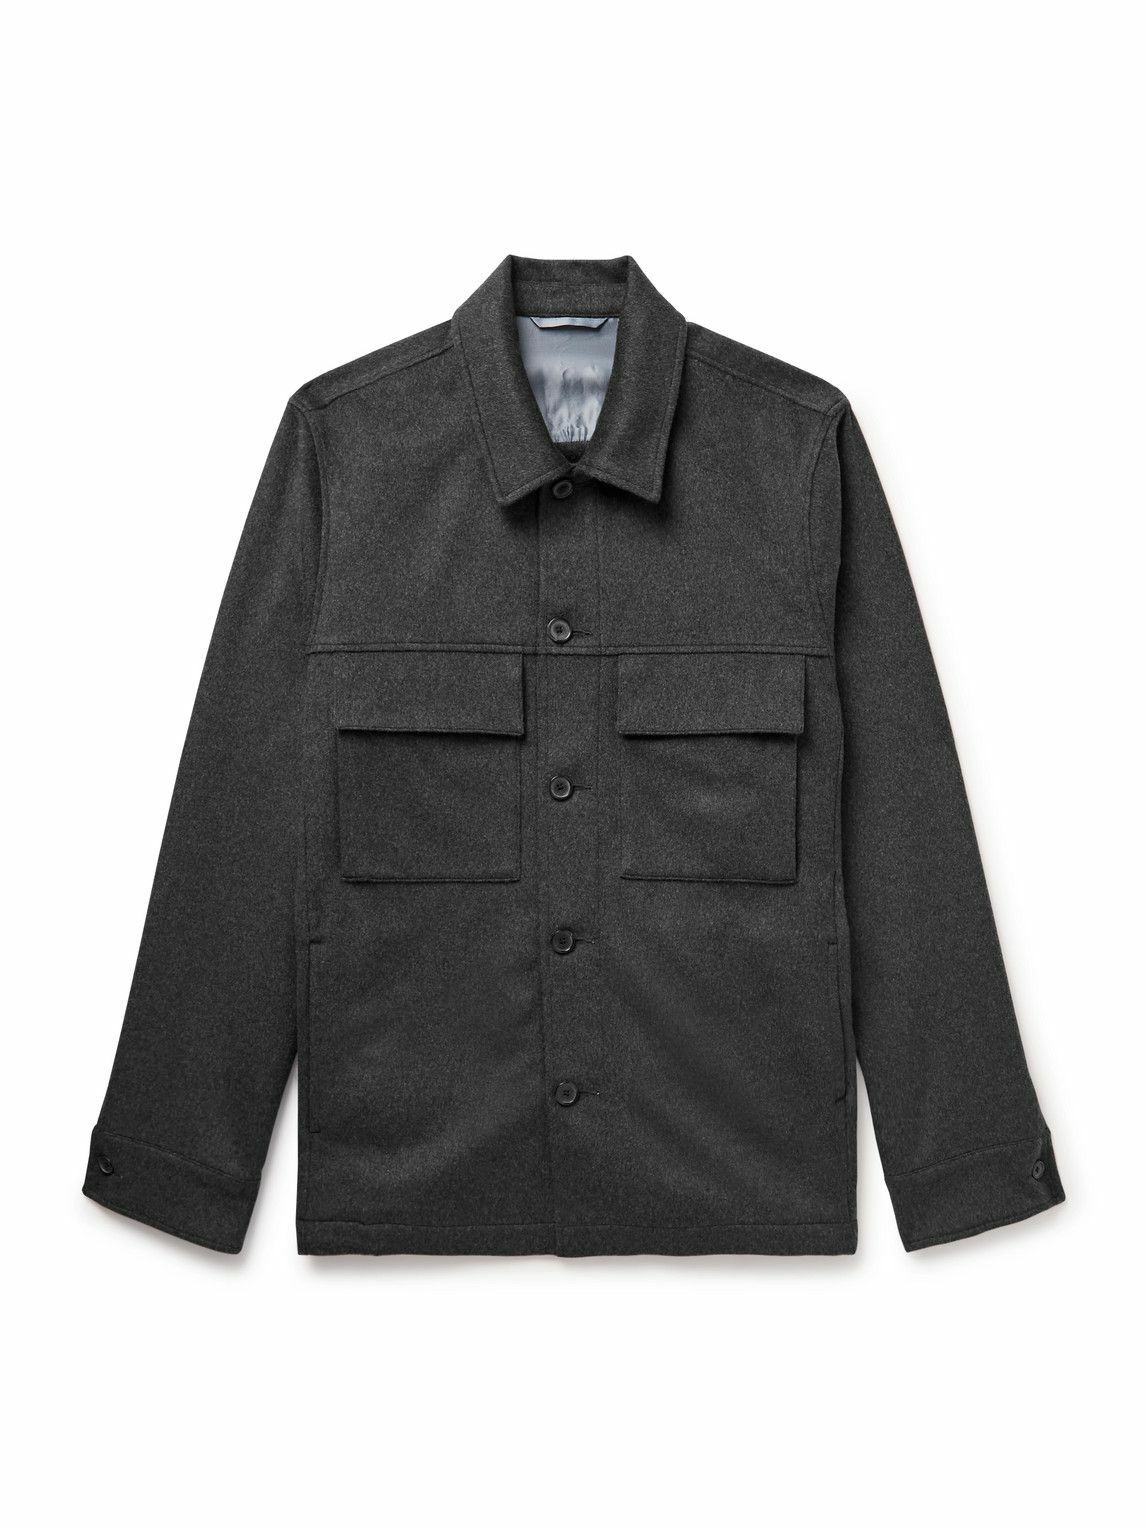 Paul Smith - Wool and Cashmere-Blend Shirt Jacket - Gray Paul Smith